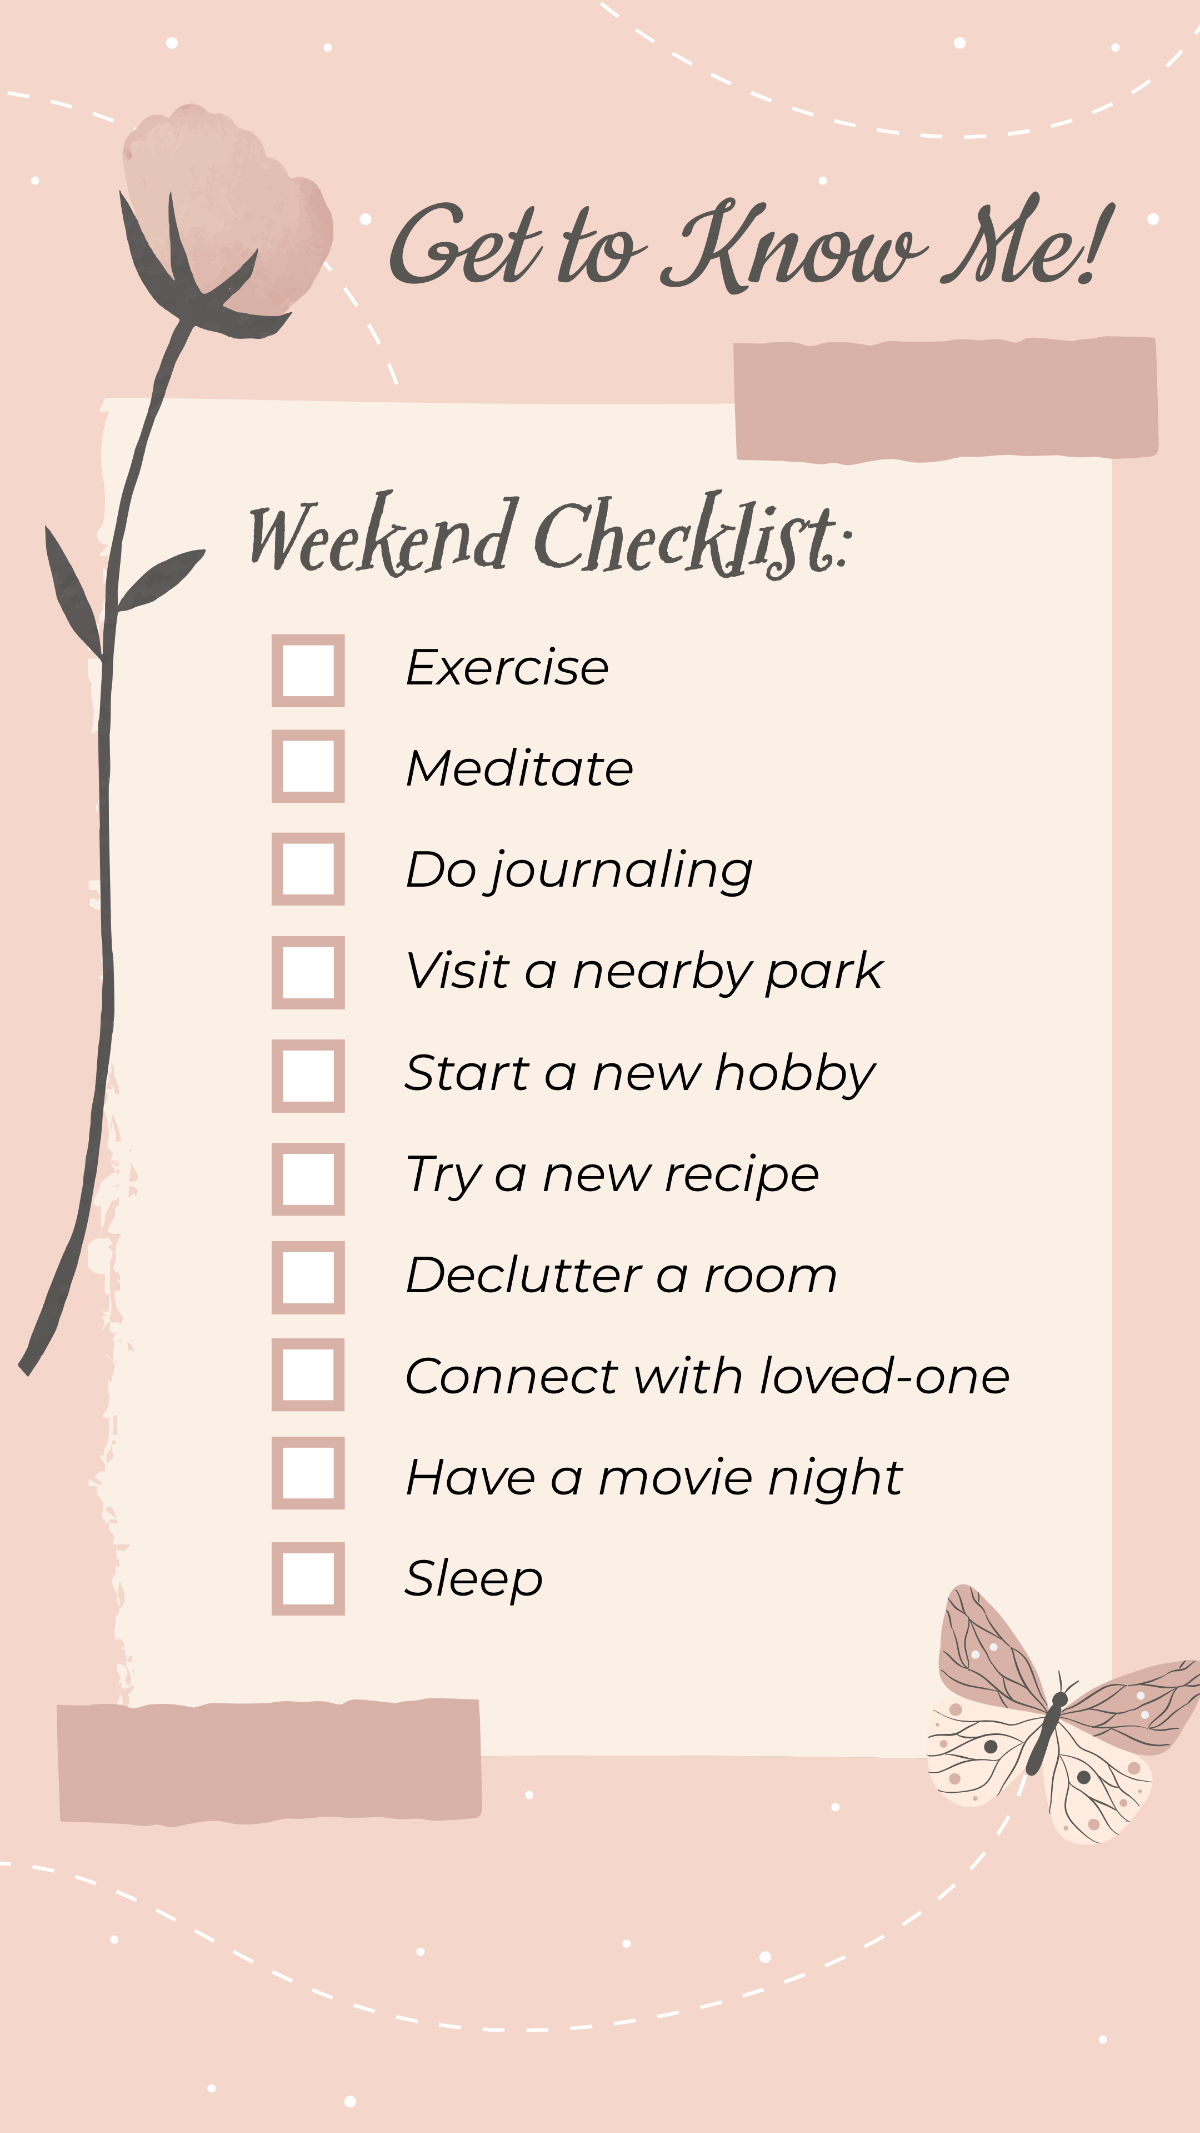 Get to Know Me Weekend Checklist Instagram Story